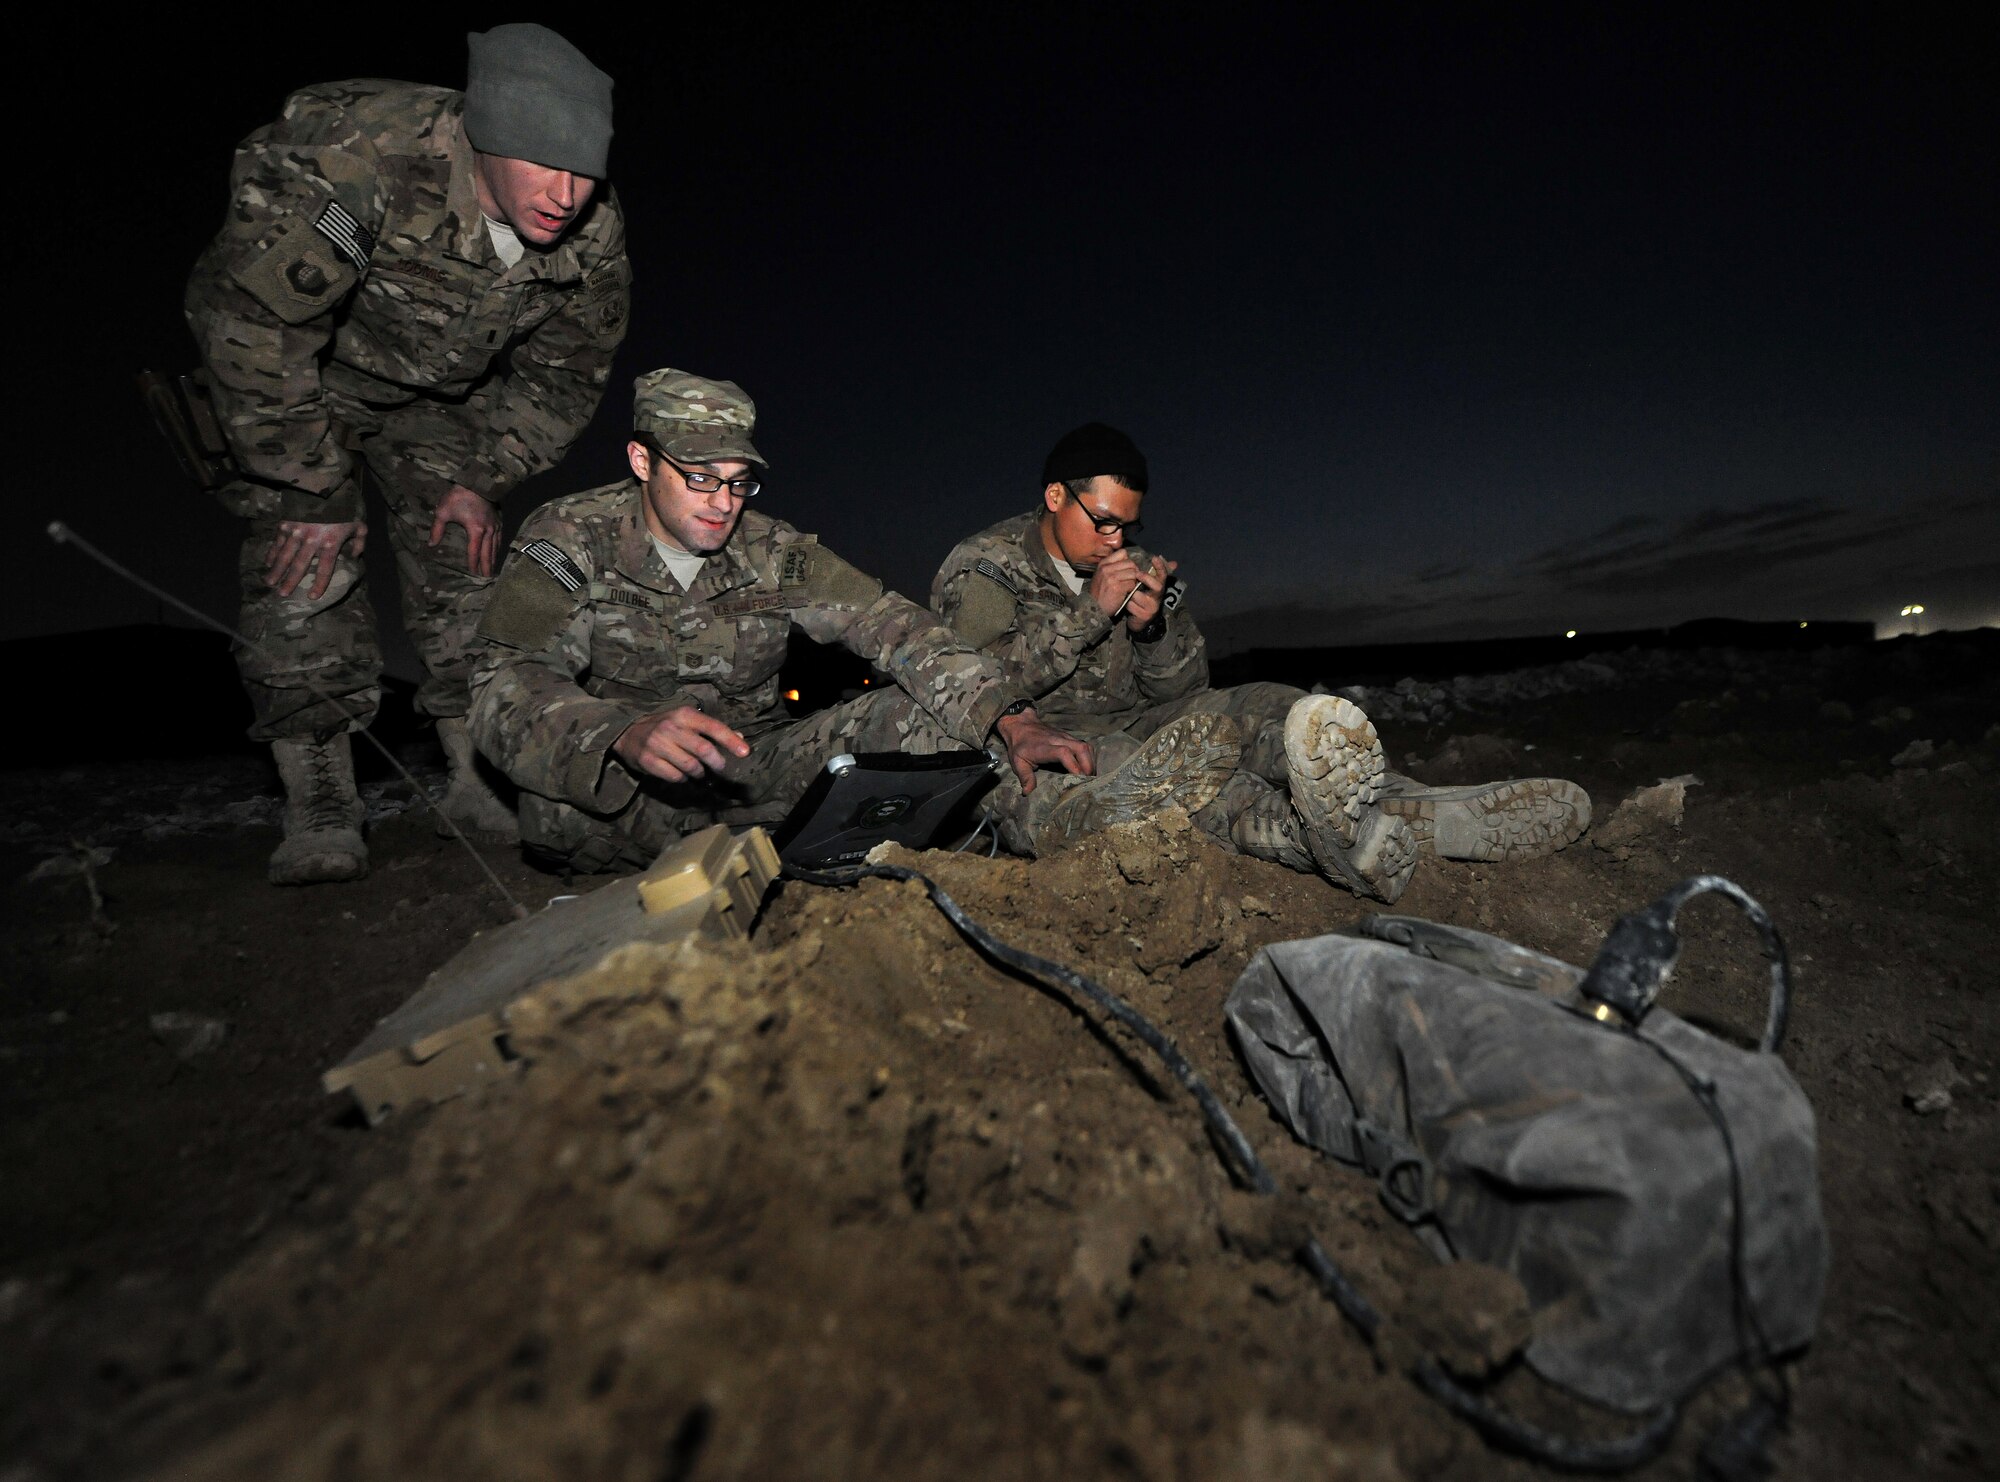 1st Lt. Joshua Loomis, Tech. Sgt. John Dolbee, and Staff Sgt. Ben DeSantiago, 755th Expeditionary Security Forces Squadron Reaper team trackers, monitor enemy movement and detection sensors at Bagram Airfield, Afghanistan, Feb. 14, 2013. The team uses a series of search techniques from simple eyes-on to ground sensors to track insurgent activity and provide site exploitation after an attack. (U.S. Air Force photo/Senior Airman Chris Willis)